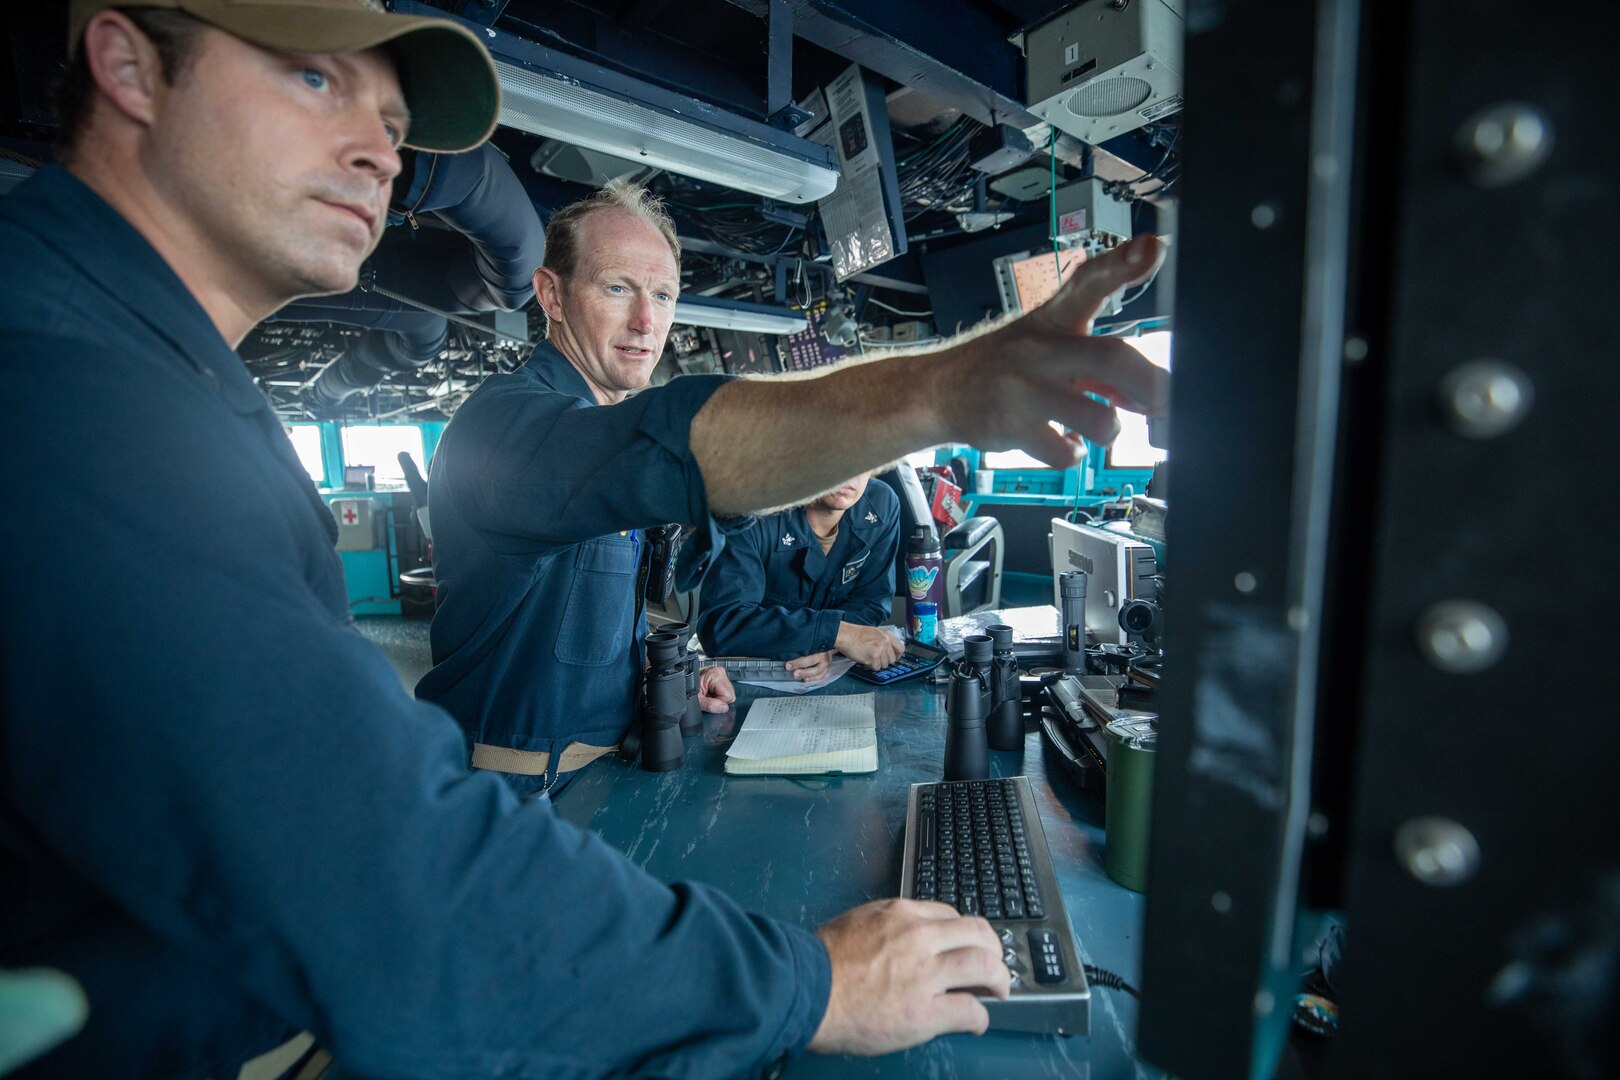 Cmdr. Kevin Schaeffer, commanding officer of the Arleigh Burke-class guided-missile destroyer USS Chung-Hoon (DDG 93) and Lt. William Stimson discuss safe navigation and plotting during a transit through the Taiwan Strait. USS Chung-Hoon is on a routine deployment to U.S. 7th Fleet and is assigned to Commander, Task Force (CTF 71)/ Destroyer Squadron (DESRON) 15. CTF 71/DESRON 15 is the largest forward-deployed DESRON and the U.S. 7th Fleet’s principal surface force.